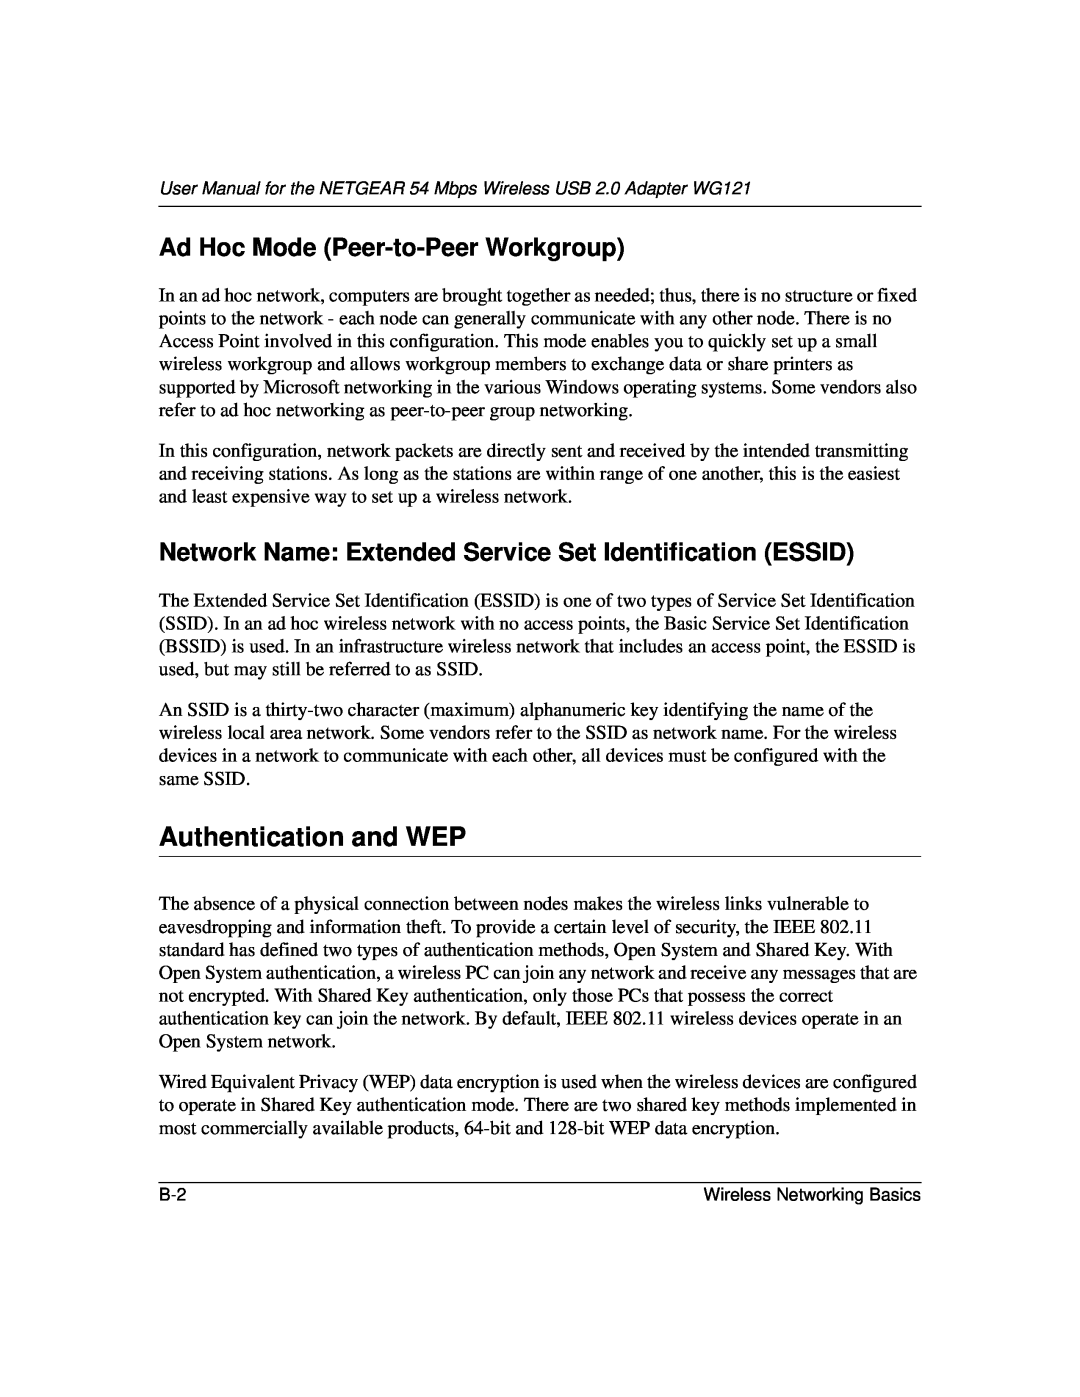 NETGEAR WG121 user manual Authentication and WEP, Ad Hoc Mode Peer-to-Peer Workgroup 